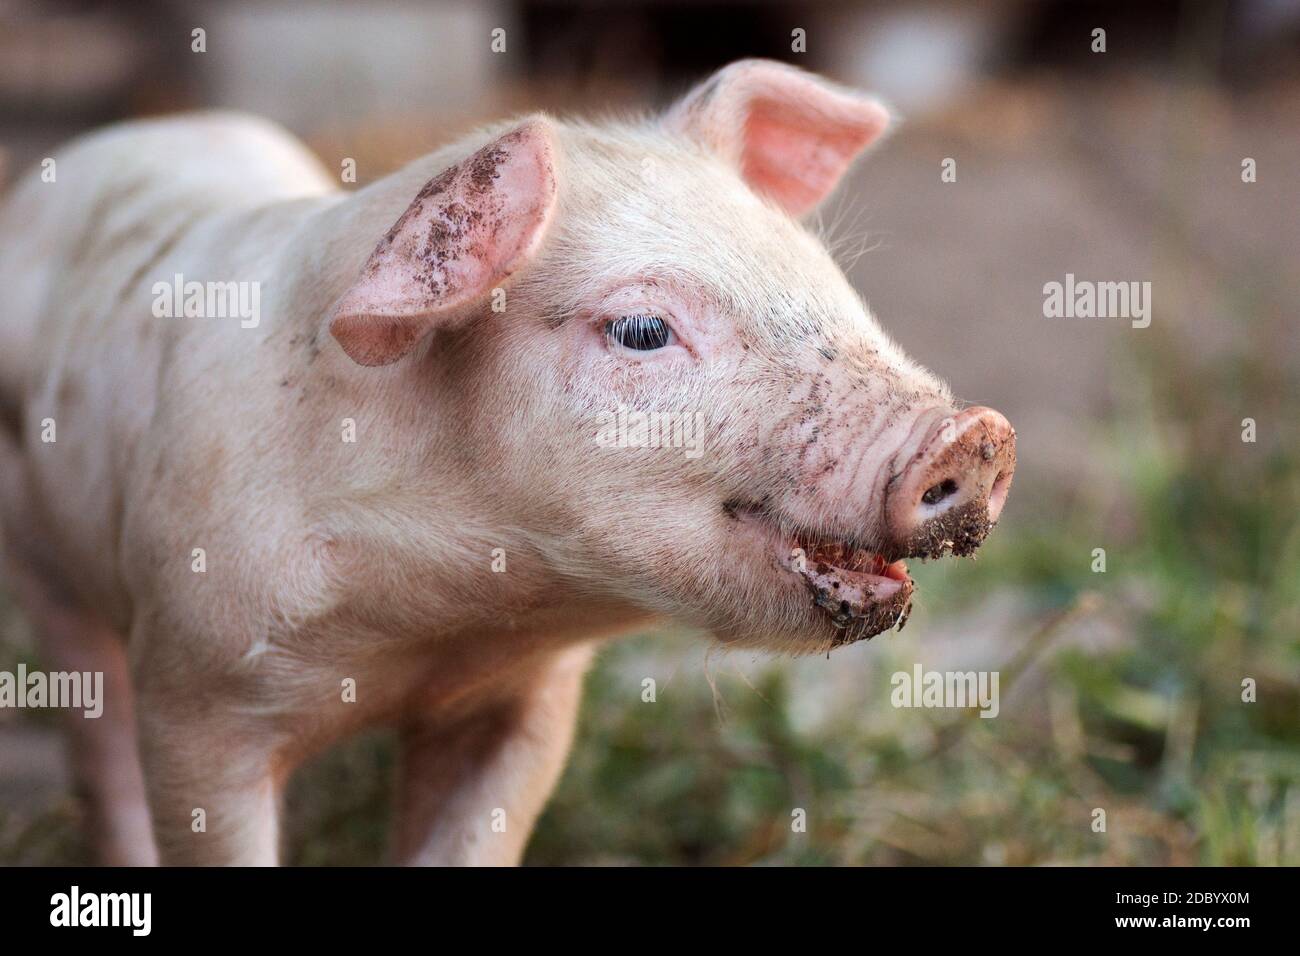 Animal portrait of dirty pink little piglet, pig breeding concept. Stock Photo